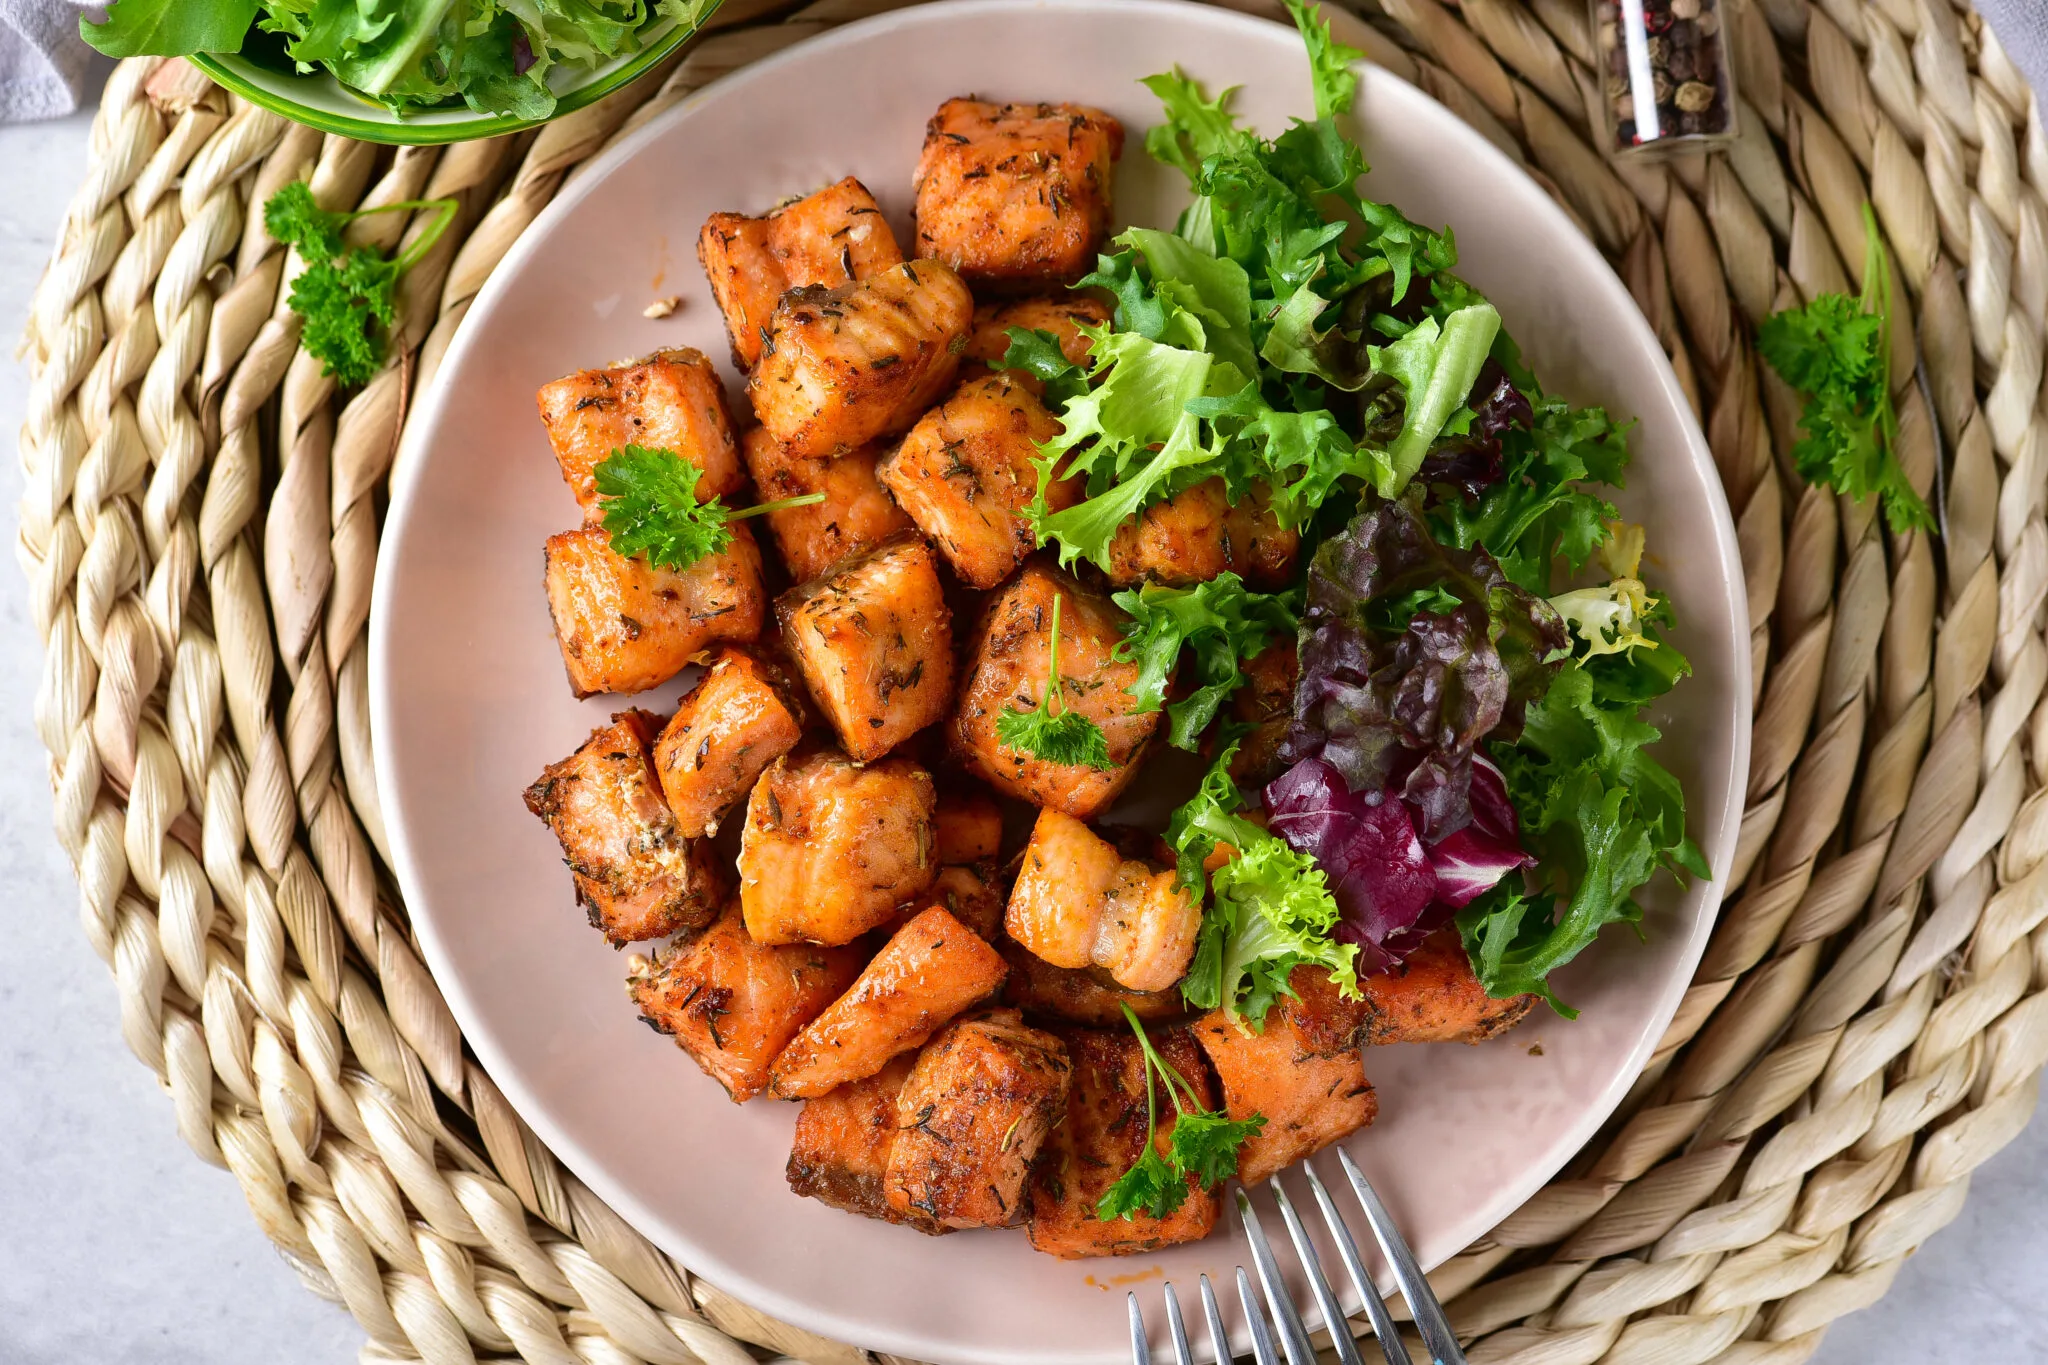 Plate of Salmon Bites with a salad and two forks.